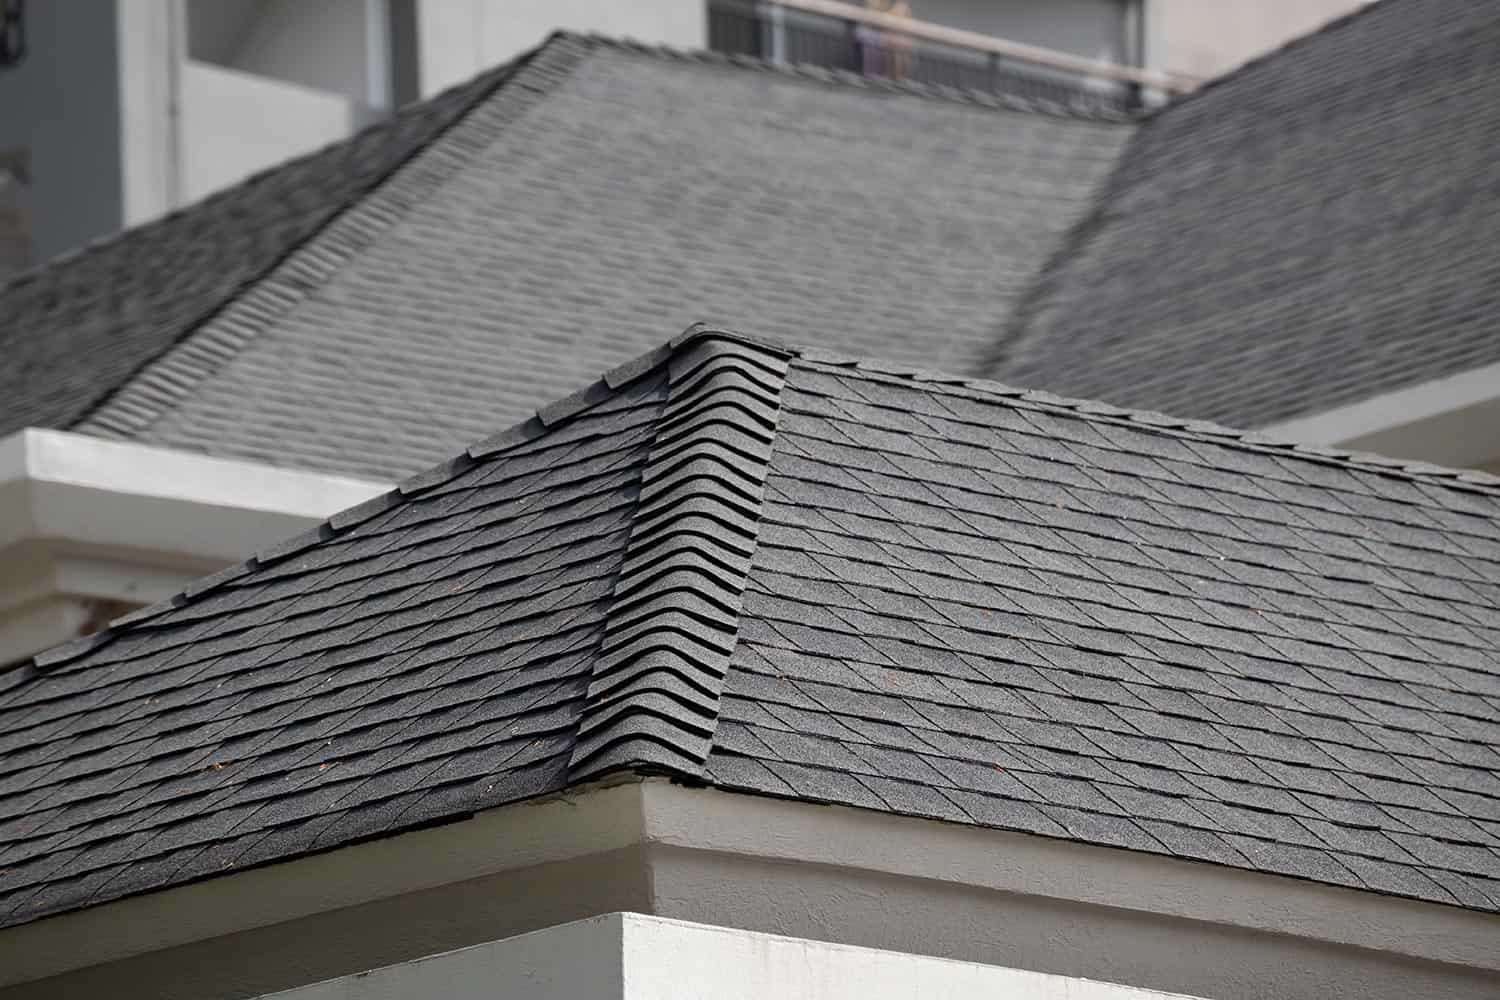 Roof shingle on the roof